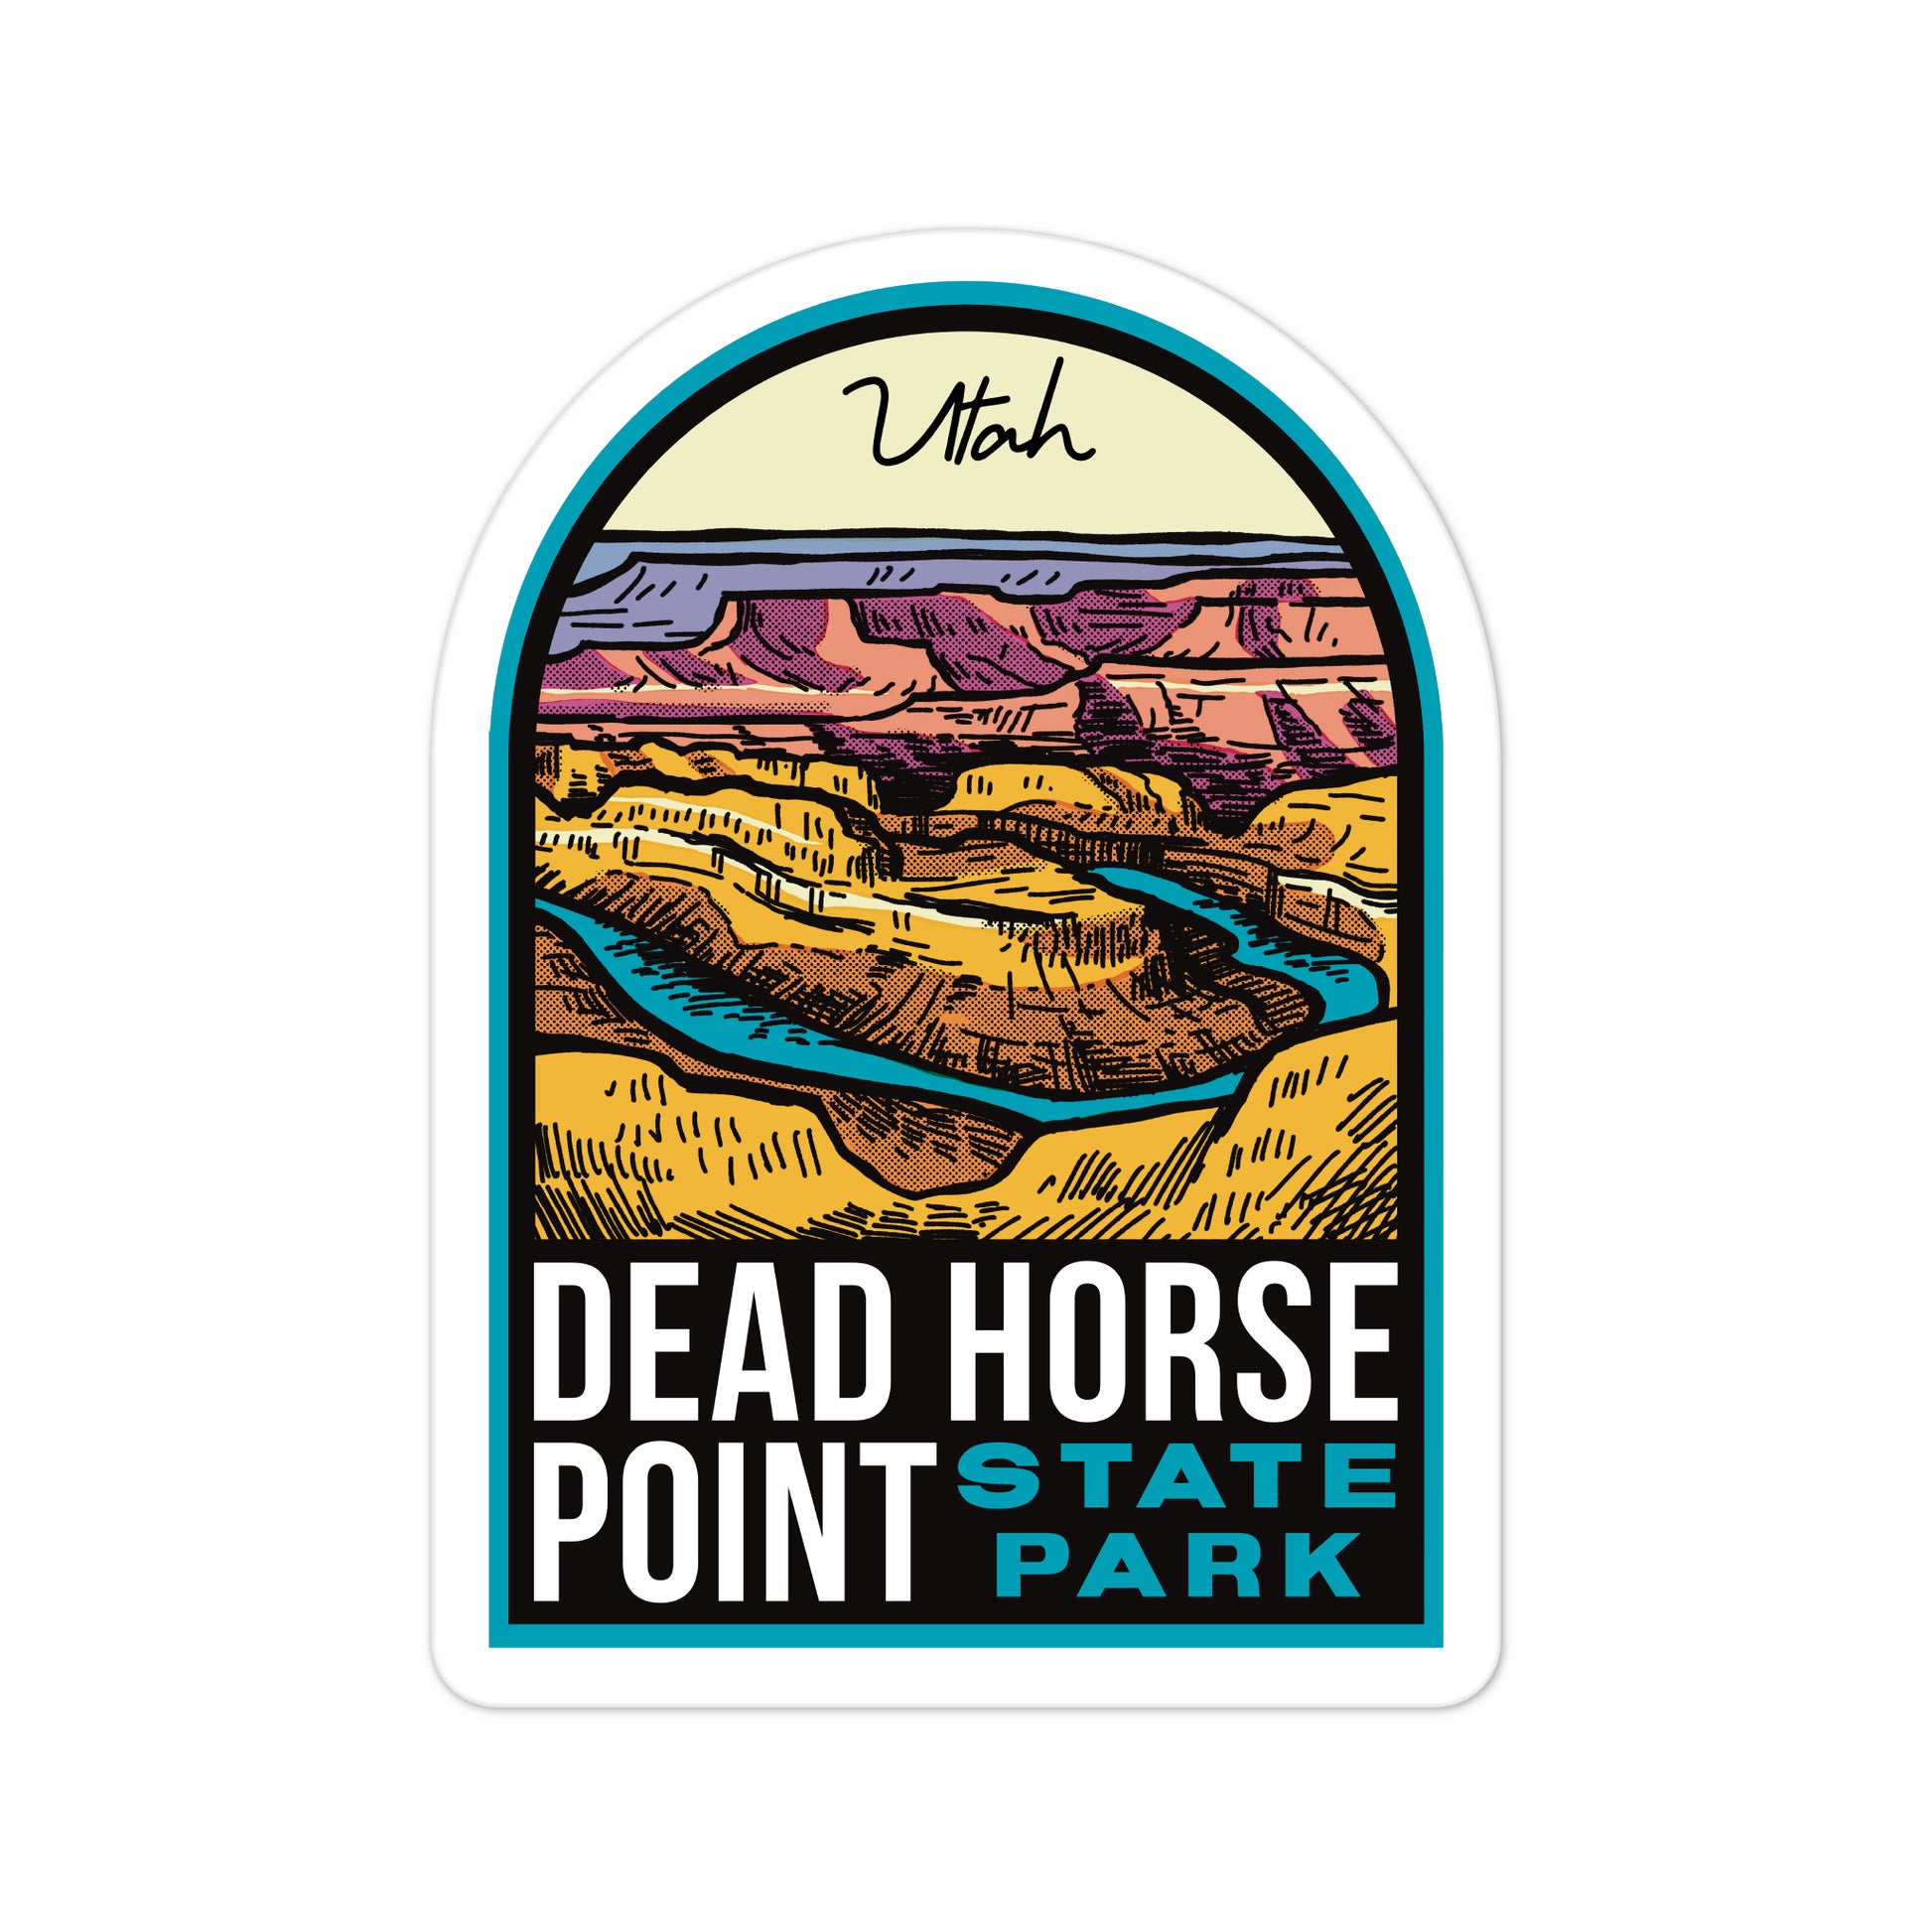 A sticker of Dead Horse Point State Park